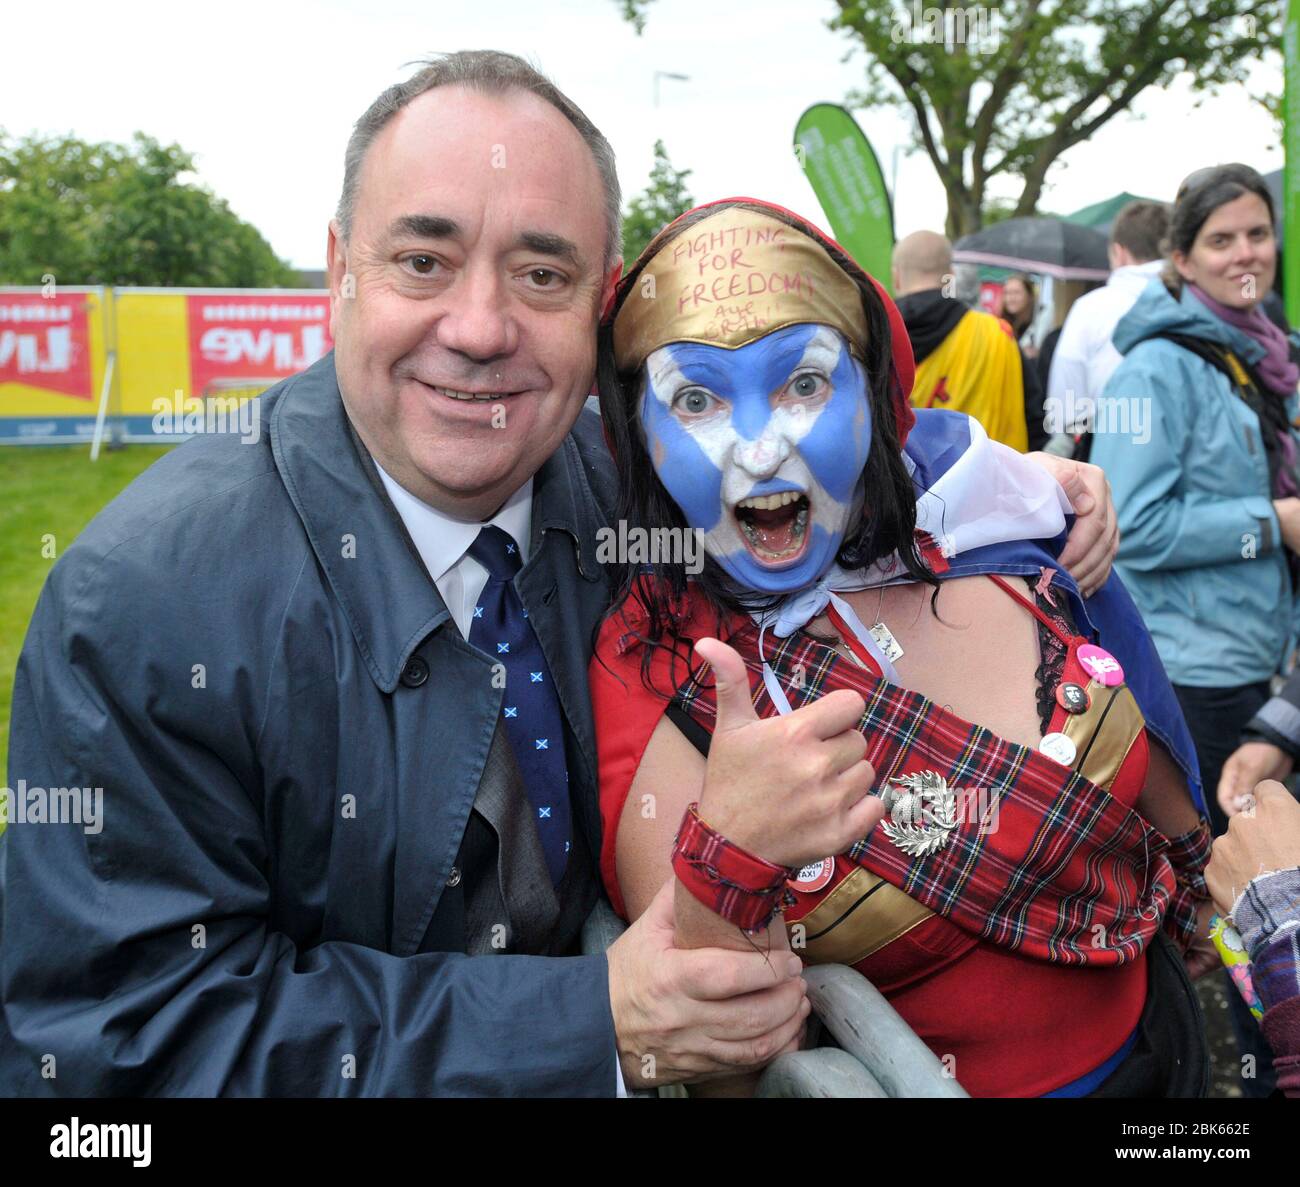 28/06/14. Alex Salmond, Scotland's First Minister pictured with a SNP supporter during Bannockburn Live 2014 event, Bannockburn, Stirling, Scotland. Stock Photo